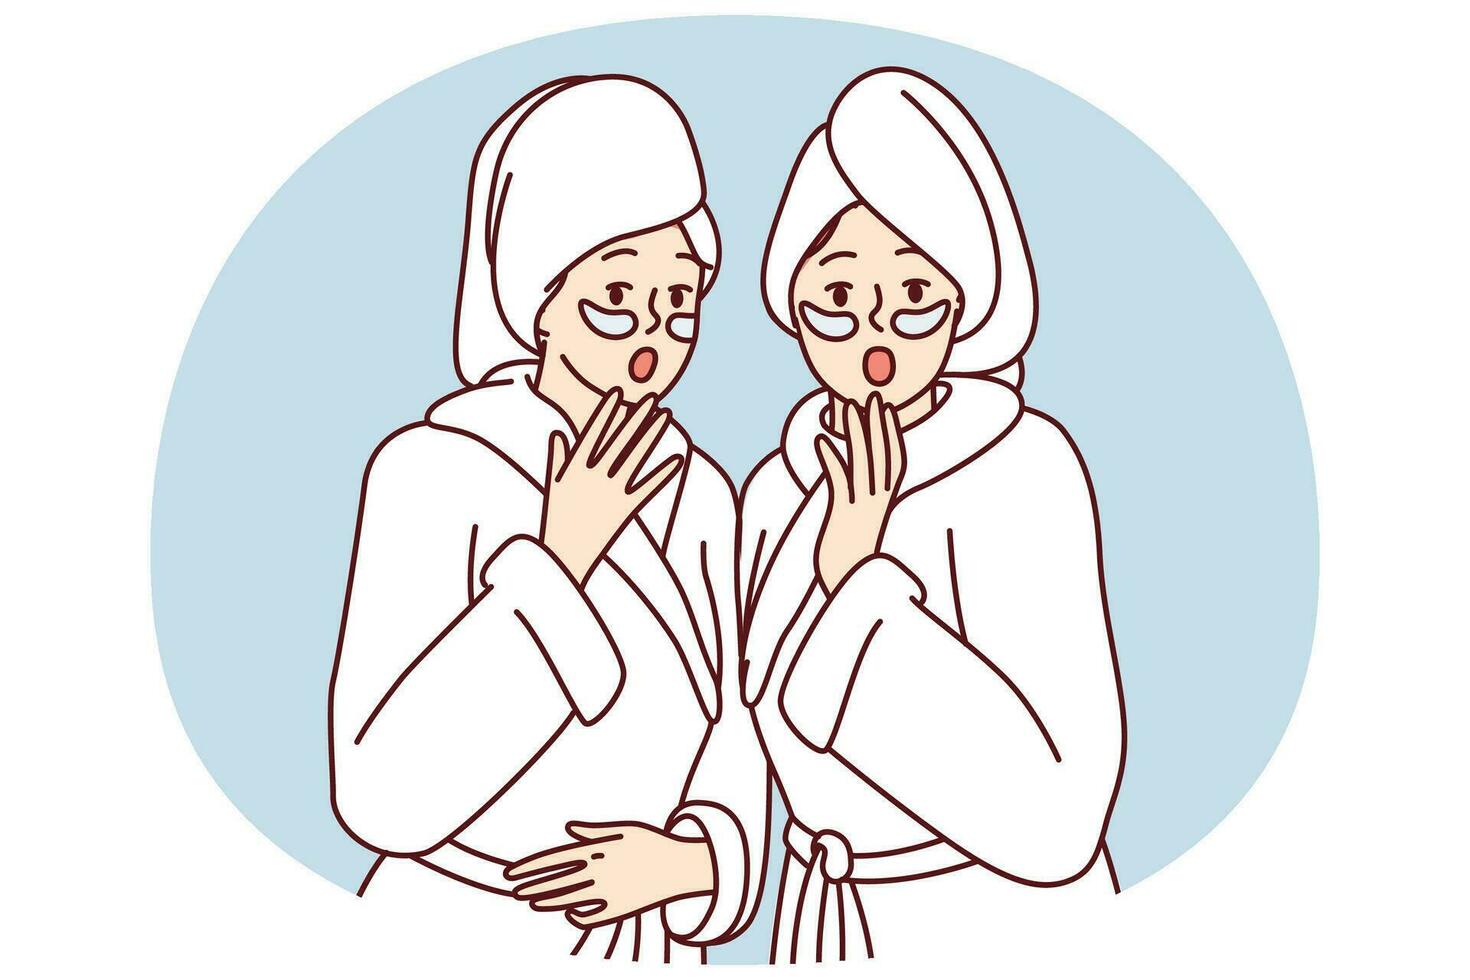 Shocked women dressed in white shower robes with towels on wet hair opening mouths. Vector image